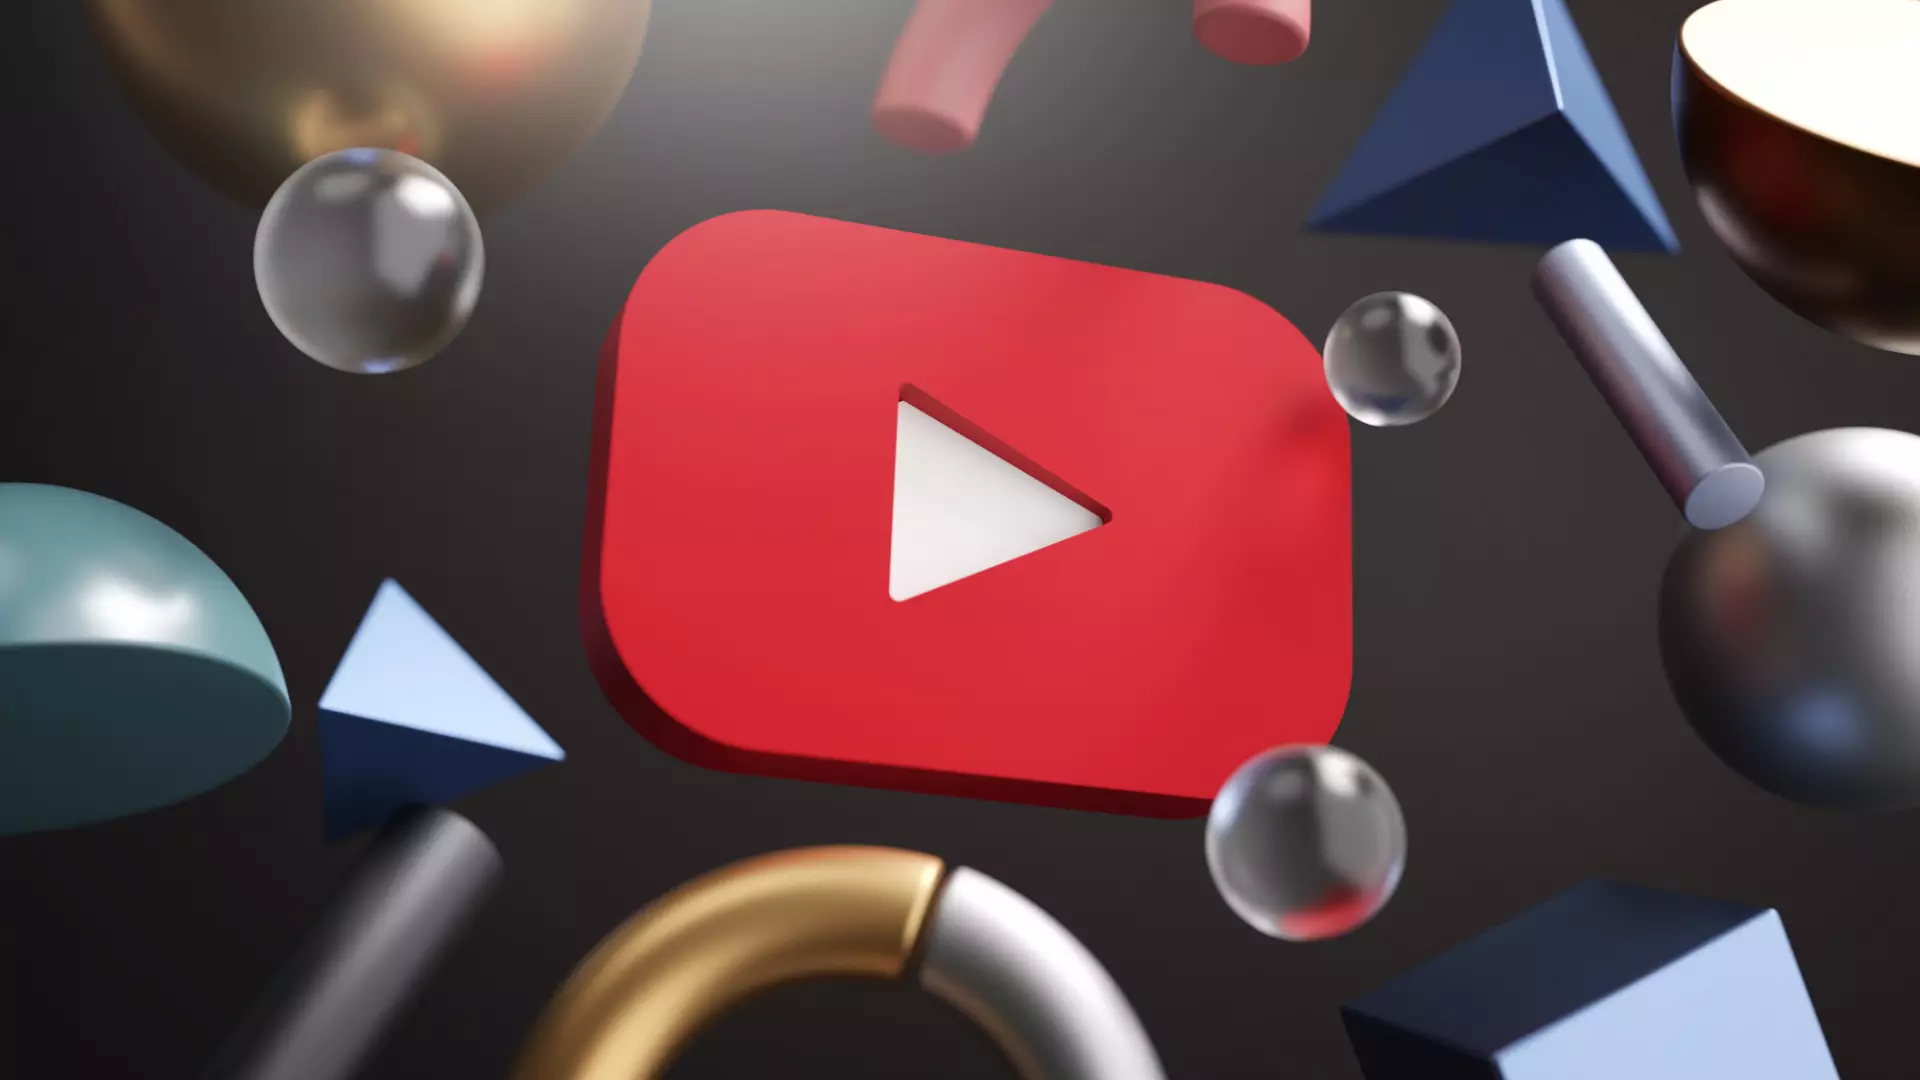 The Ultimate Guide to Profitable YouTube Niches in 2023